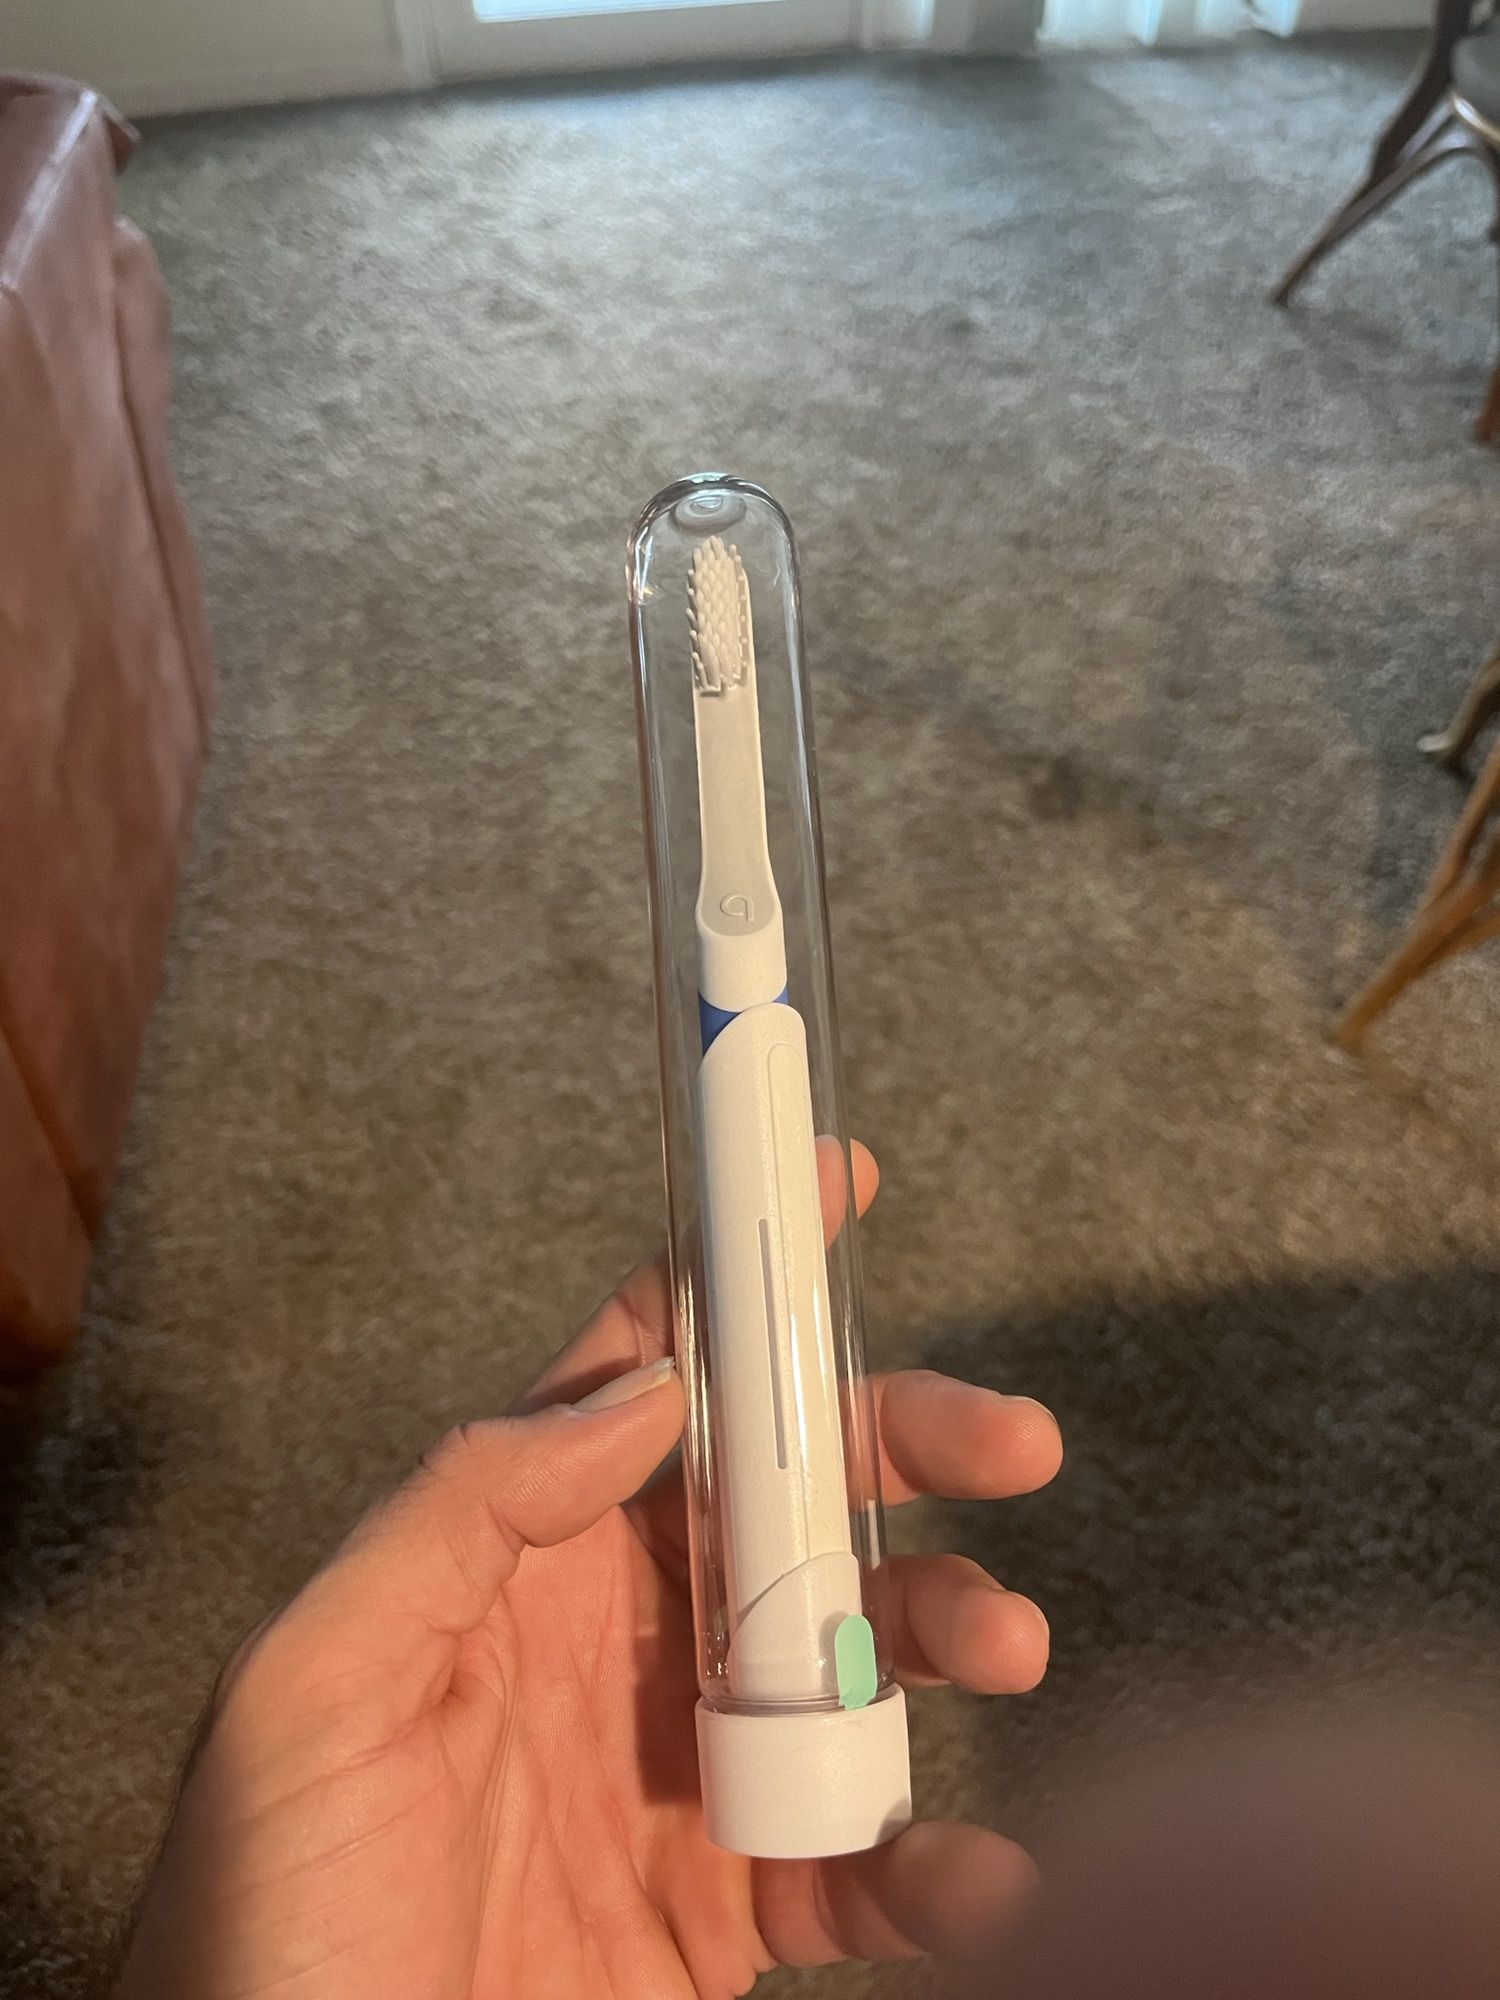 The packaging on my new toothbrush. If you turn the toothbrush on the whole thing vibrates lol.